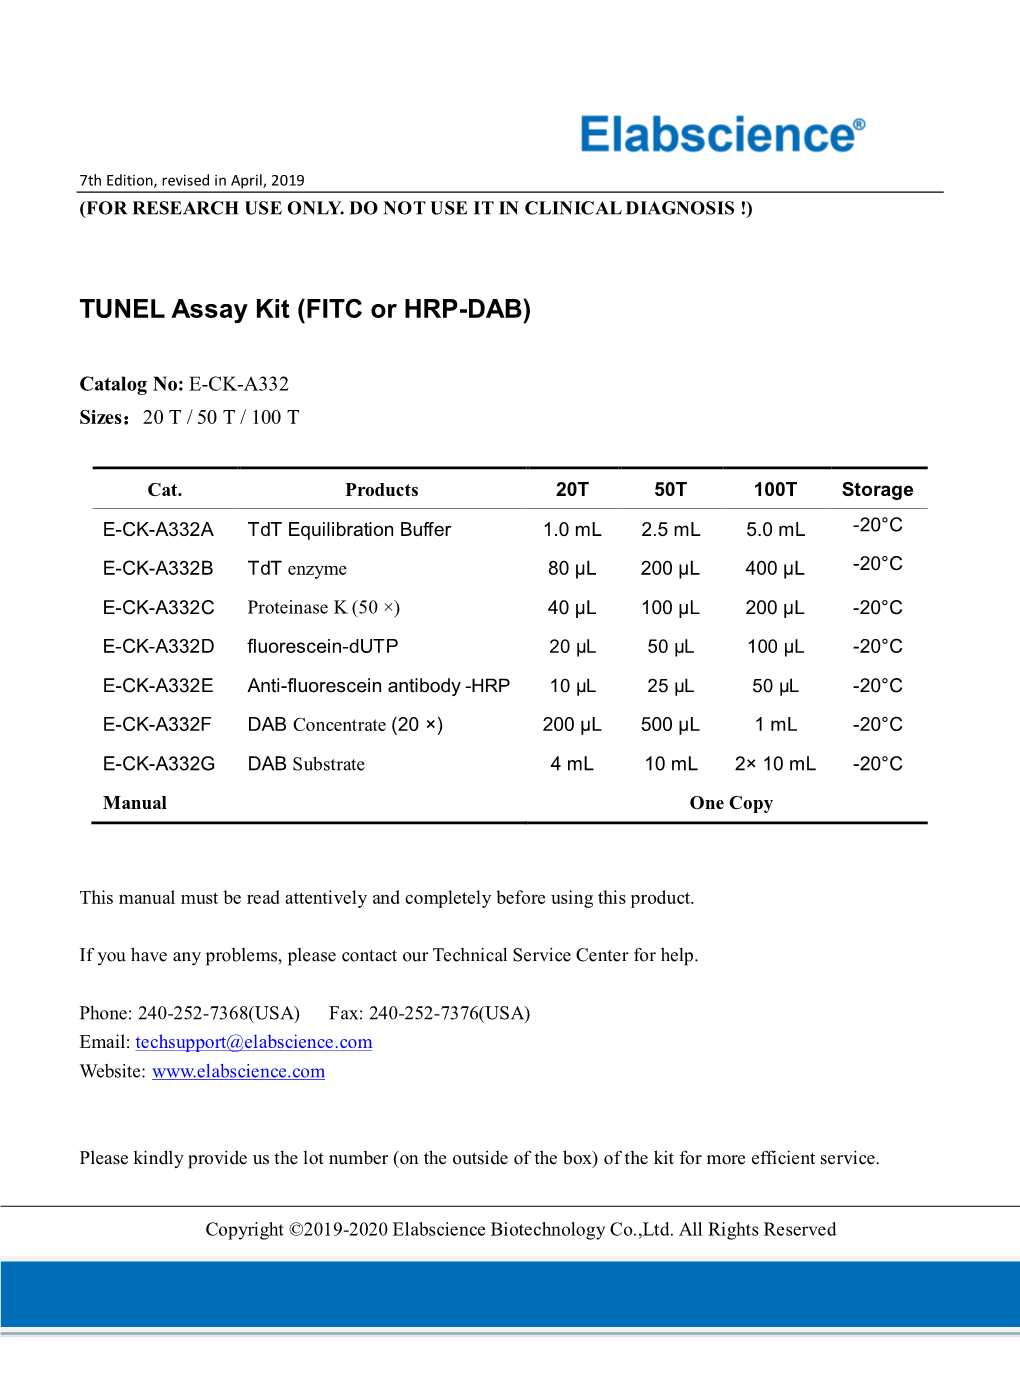 TUNEL Assay Kit (FITC Or HRP-DAB)